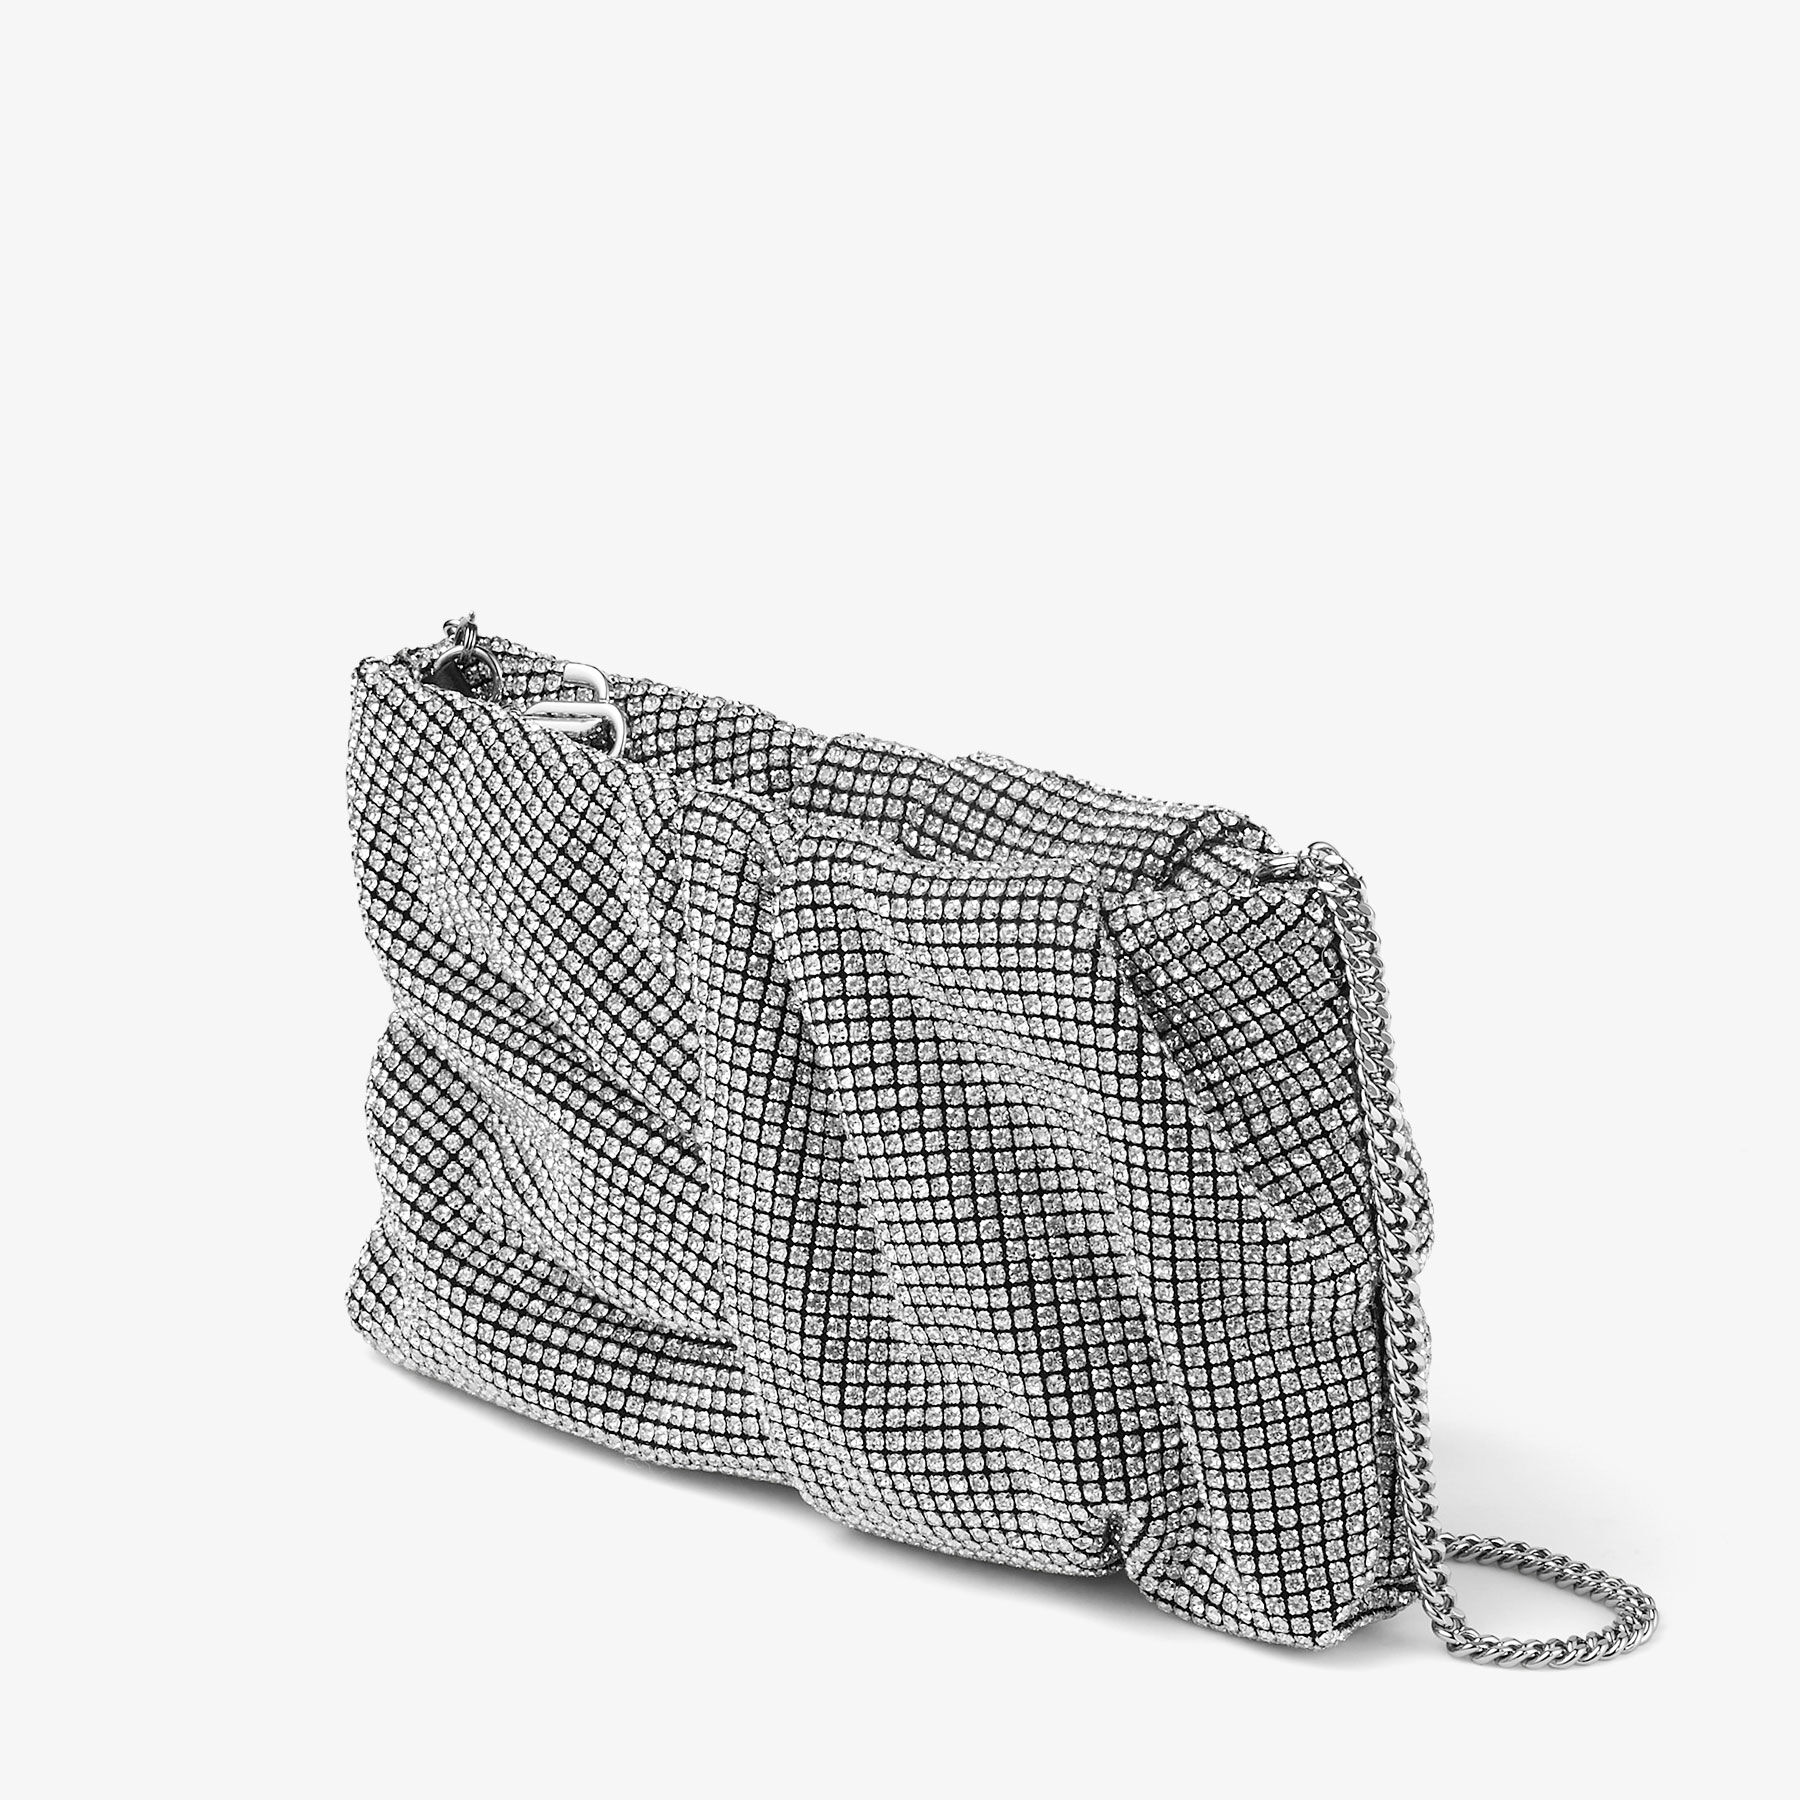 BONNY CLUTCH | Silver Crystal Mesh Clutch Bag | New Collection 